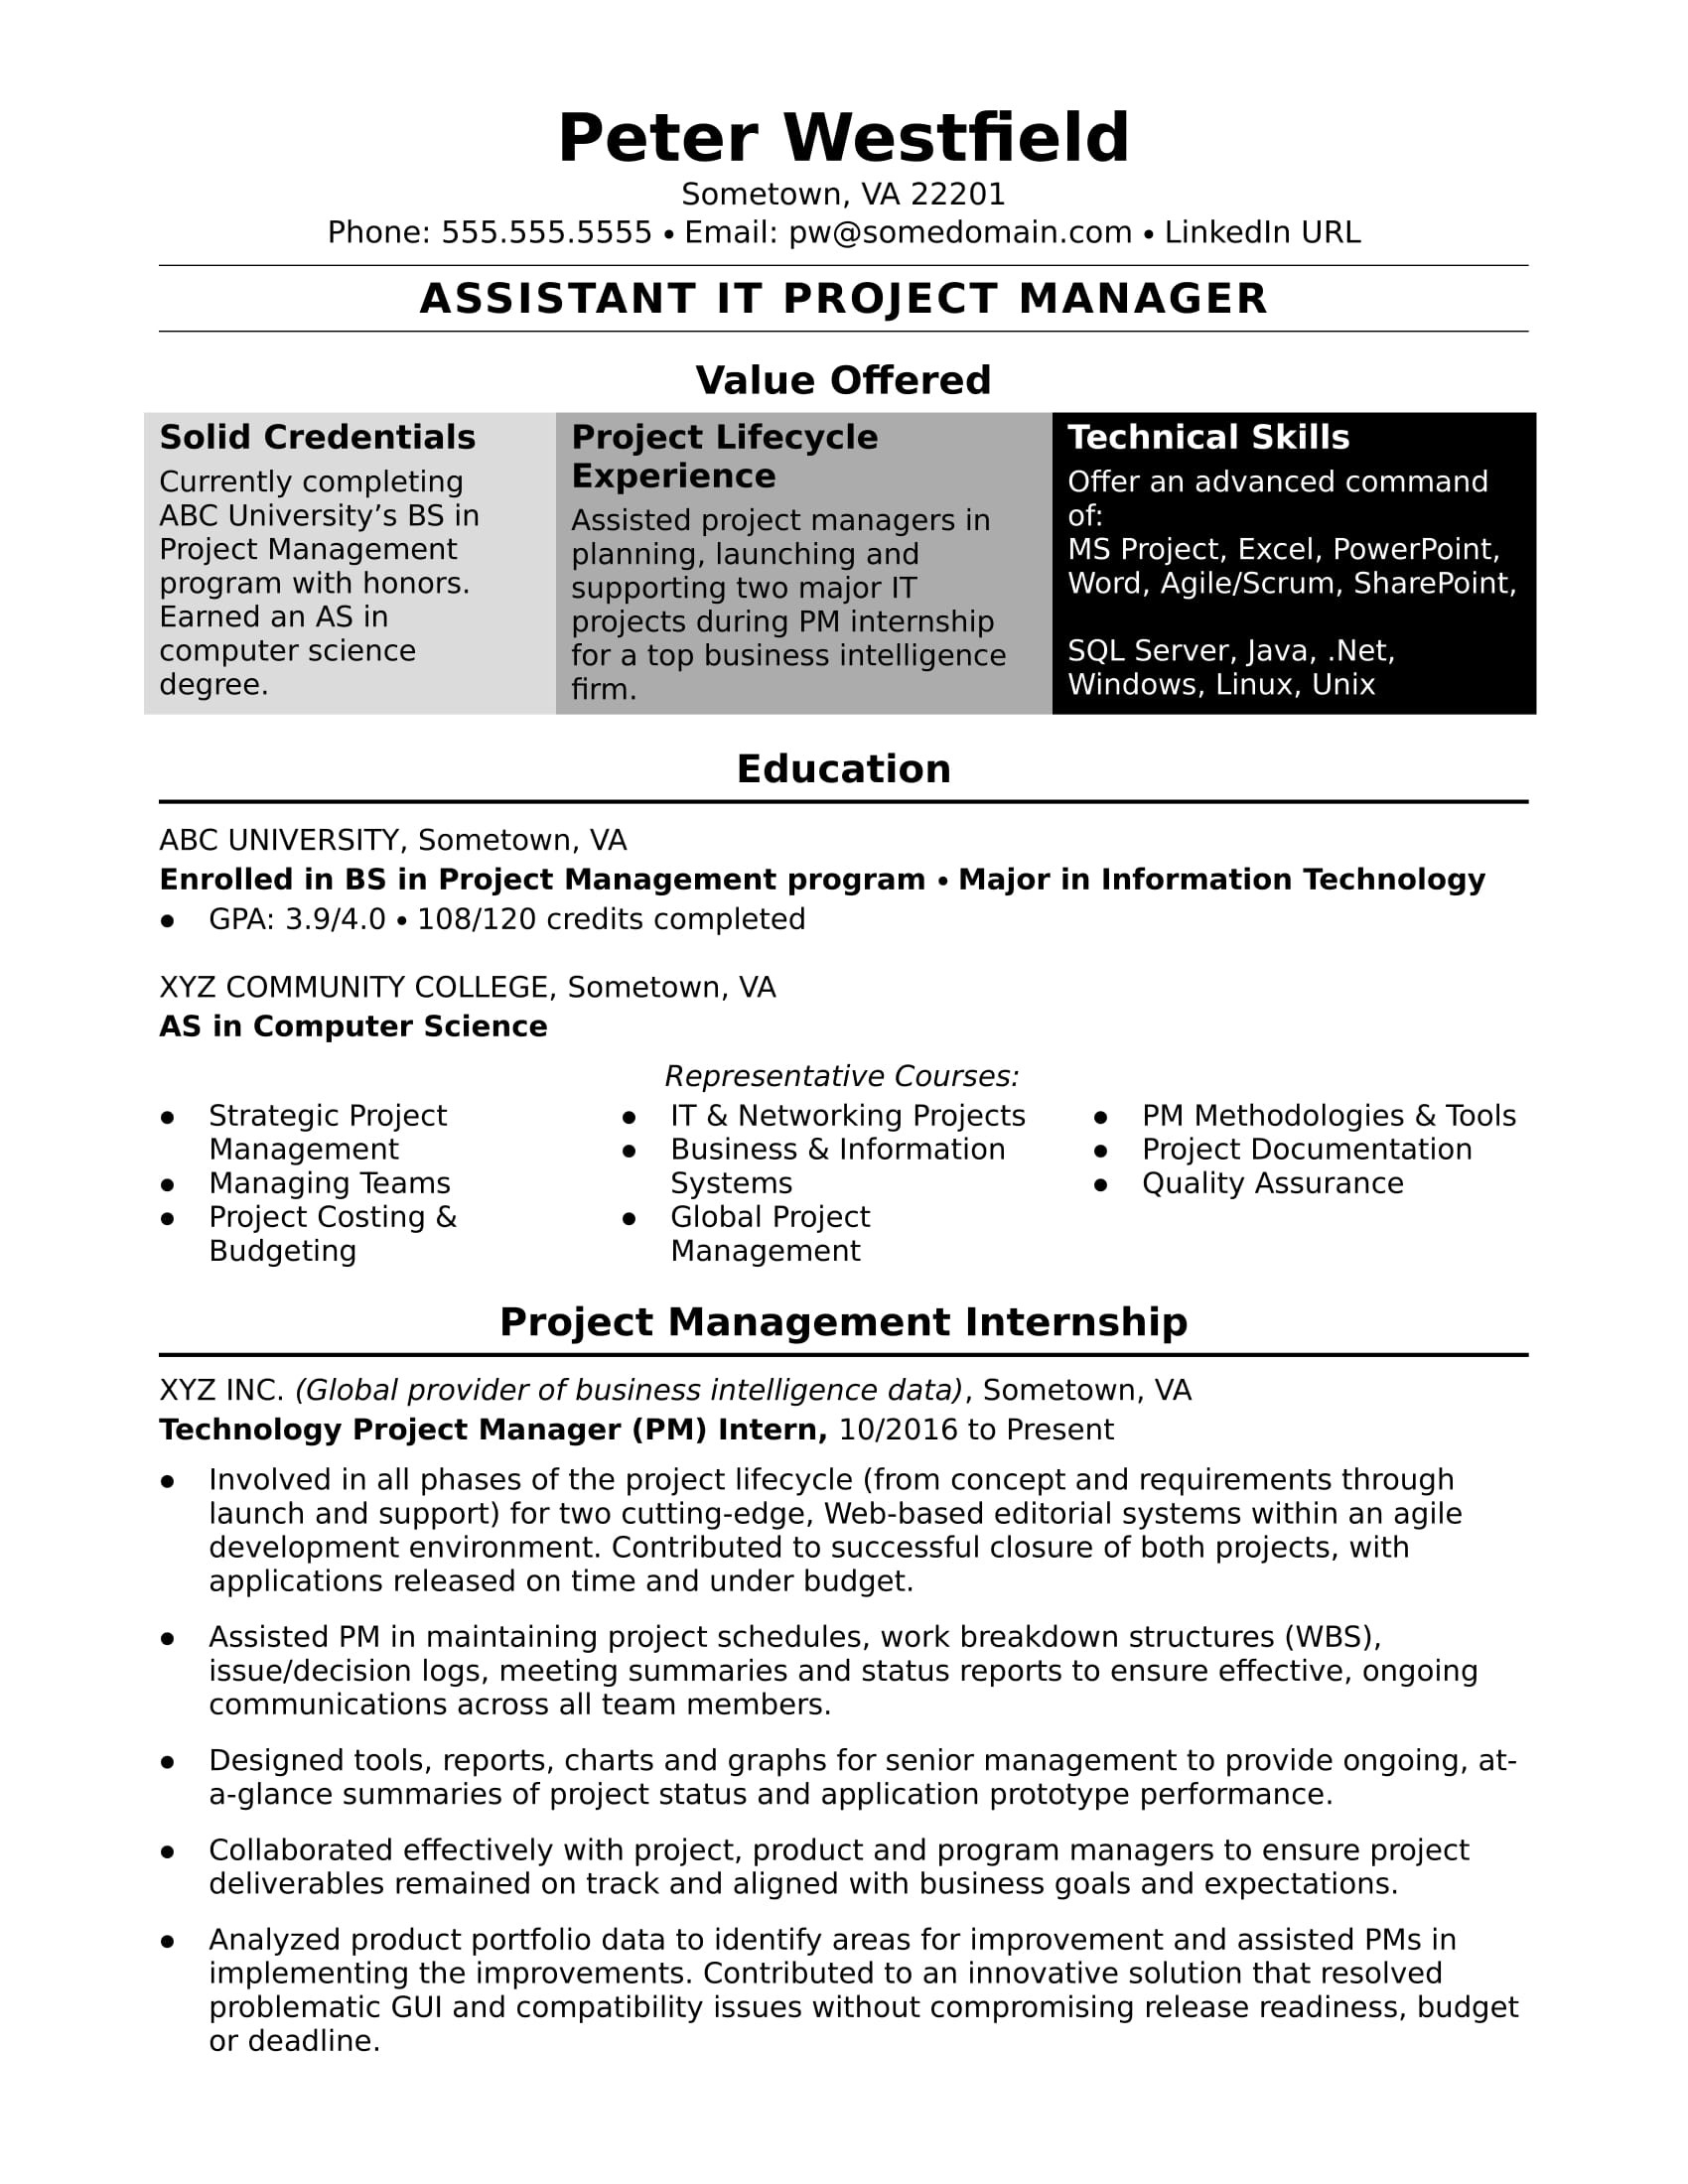 Software Project Manager Resume Sample India Sample Resume for An assistant It Project Manager Monster.com